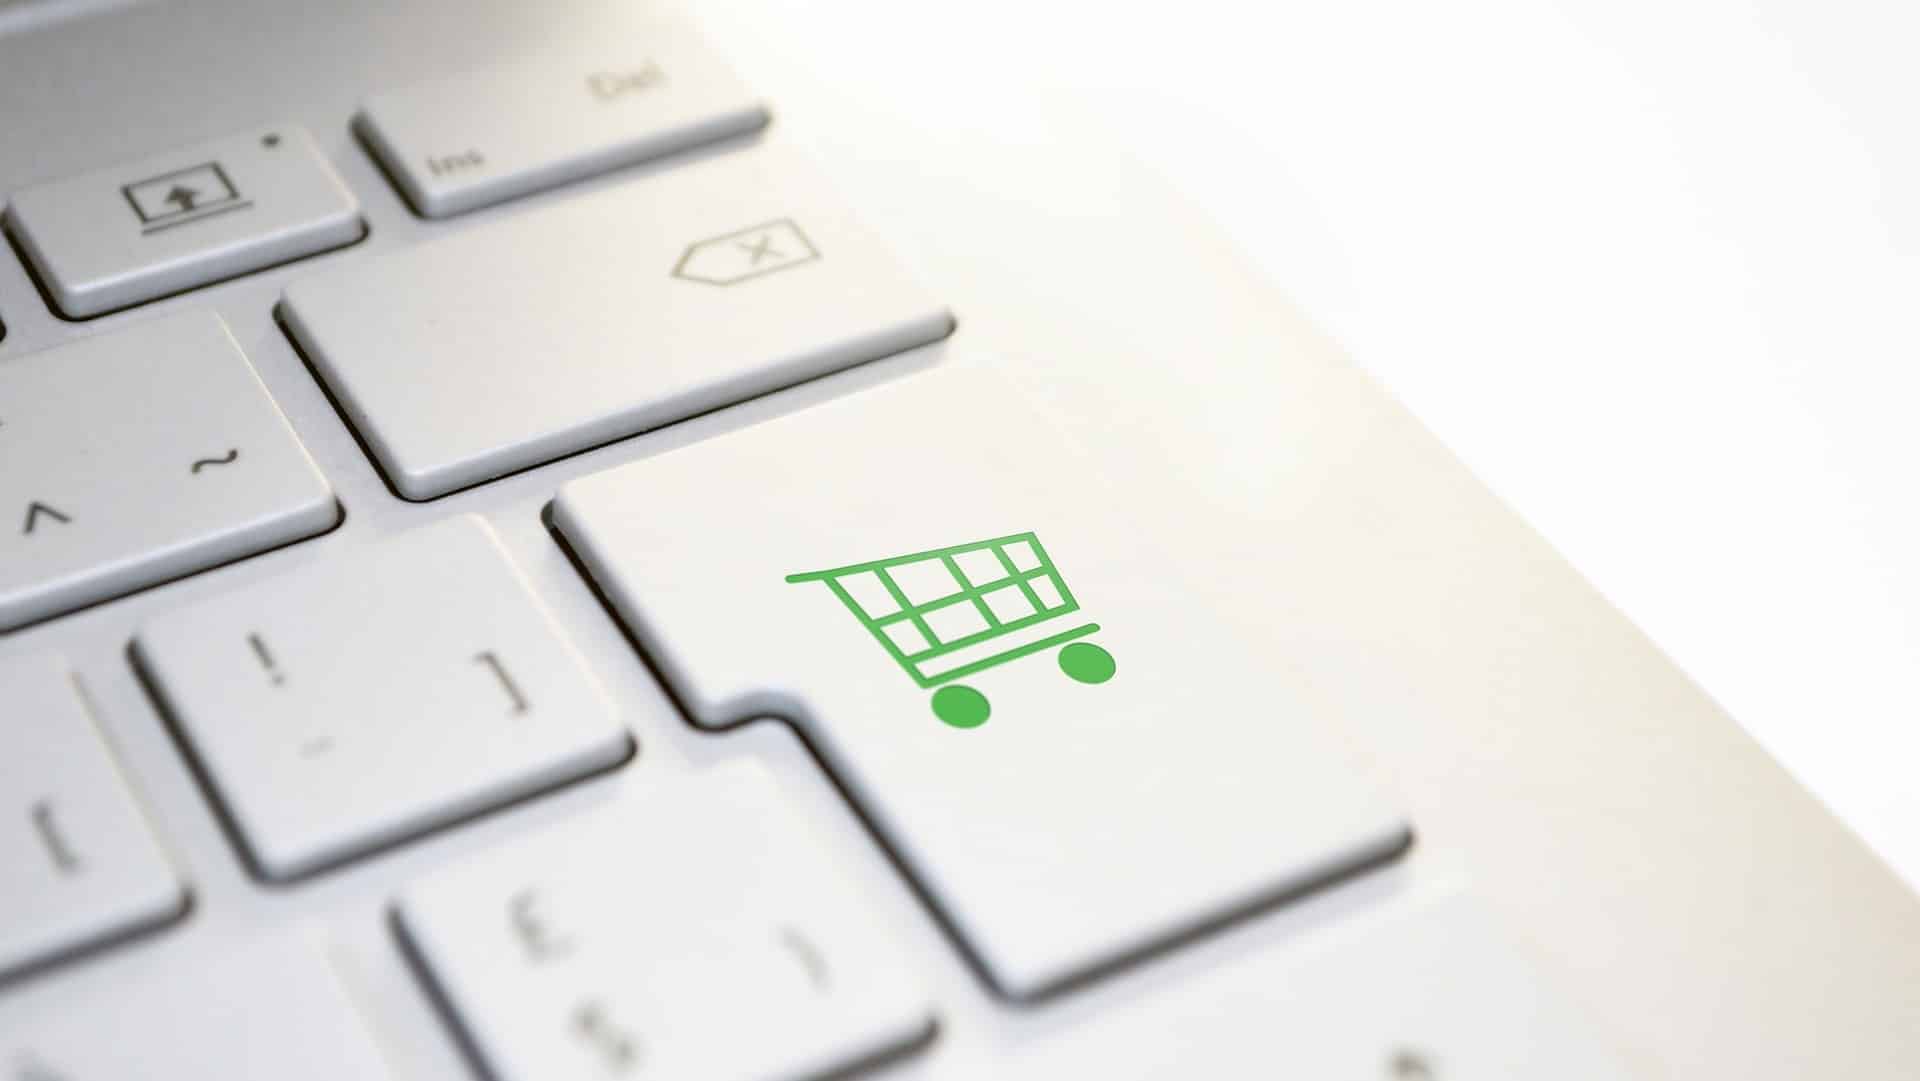 Over 77 percent believe online shopping is as safe as offline shopping: CIRC Report